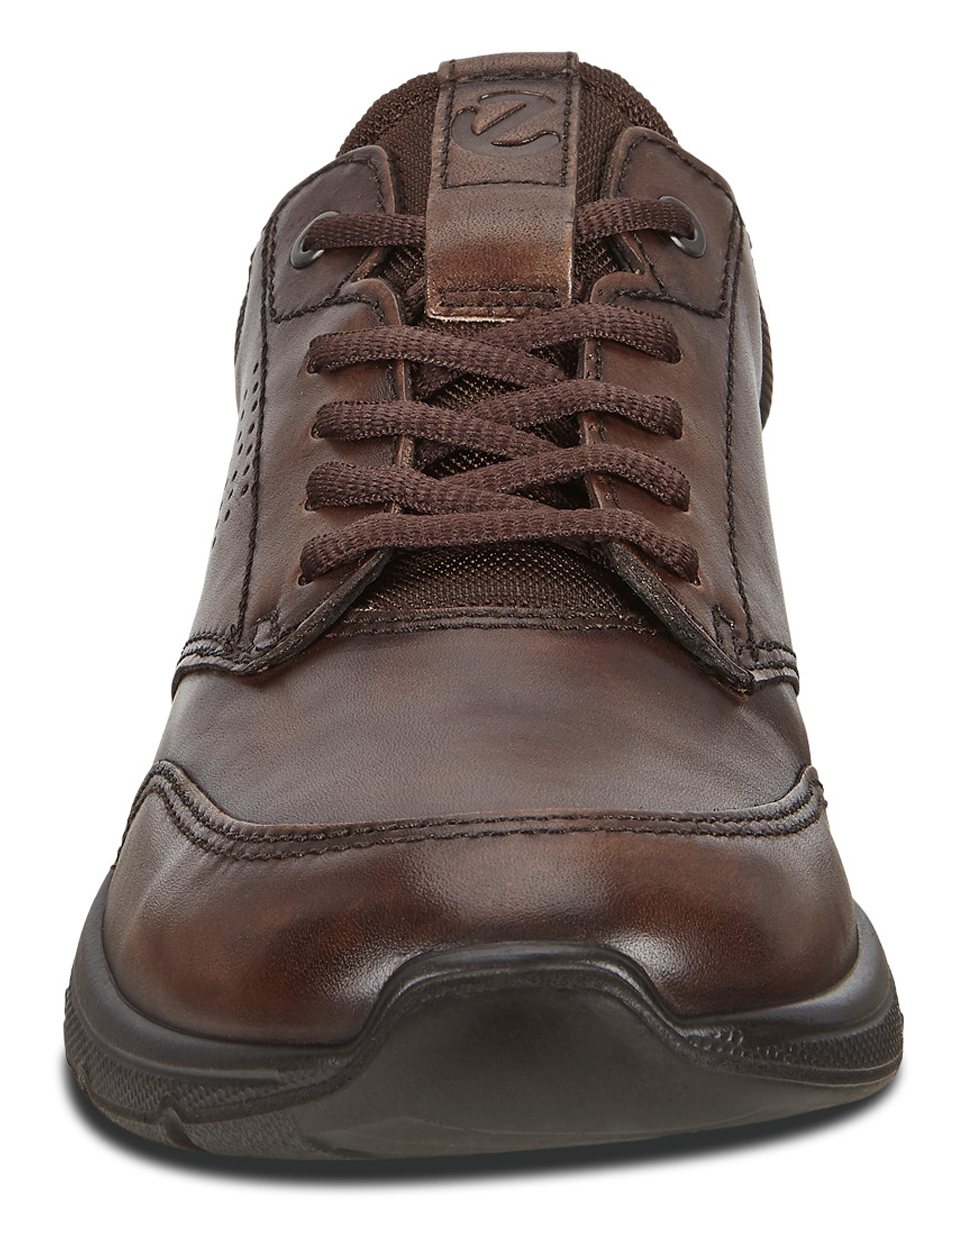 Ecco Irving 34 Brown 511734 55738 - Casual Shoes - Humphries Shoes